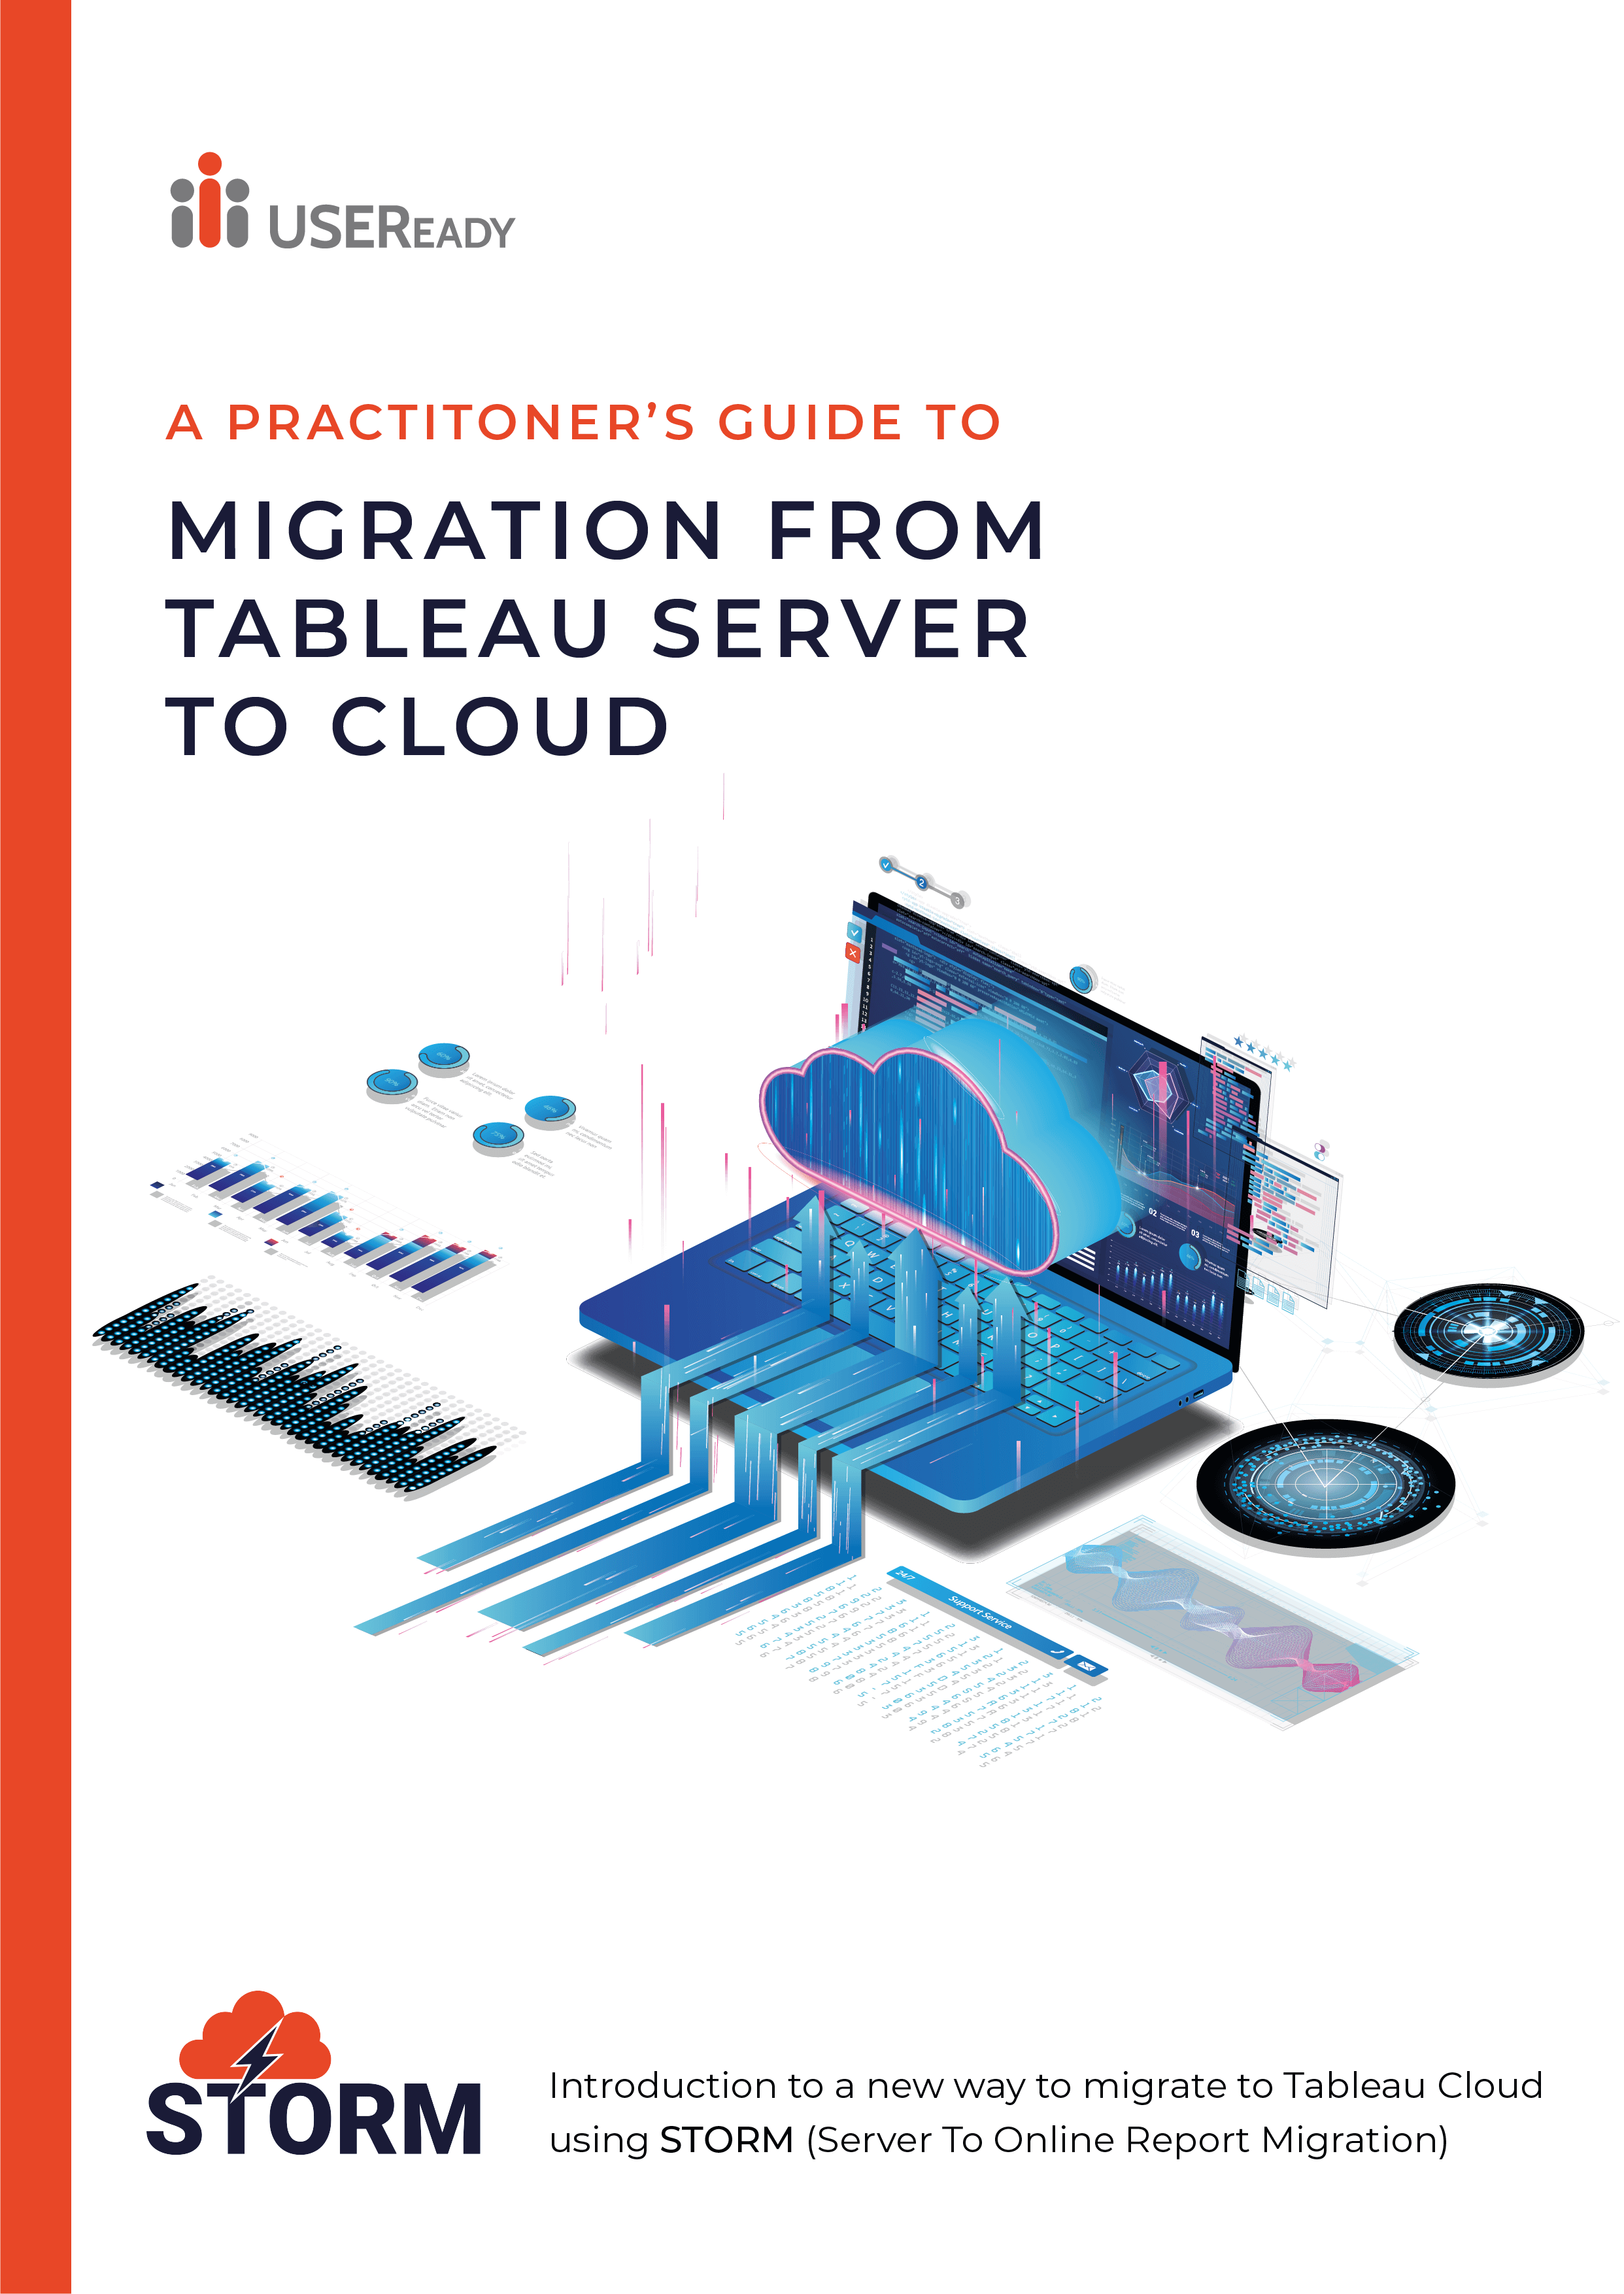 STORM: A Practitioner’s Guide to Migrate from Tableau Server to Cloud